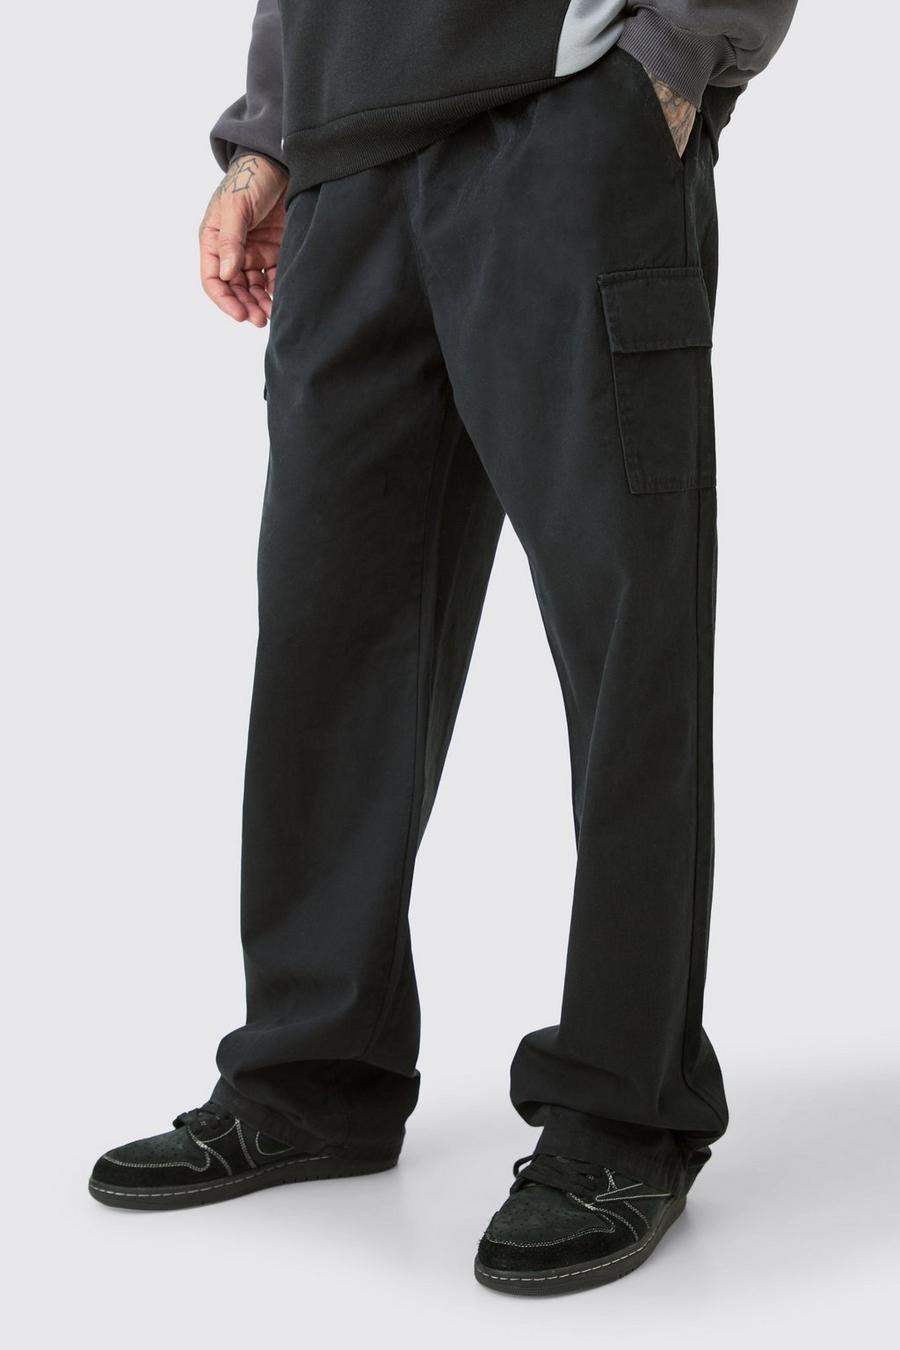 Black Tall Elasticated Waist Twill Relaxed Fit Cargo Trouser